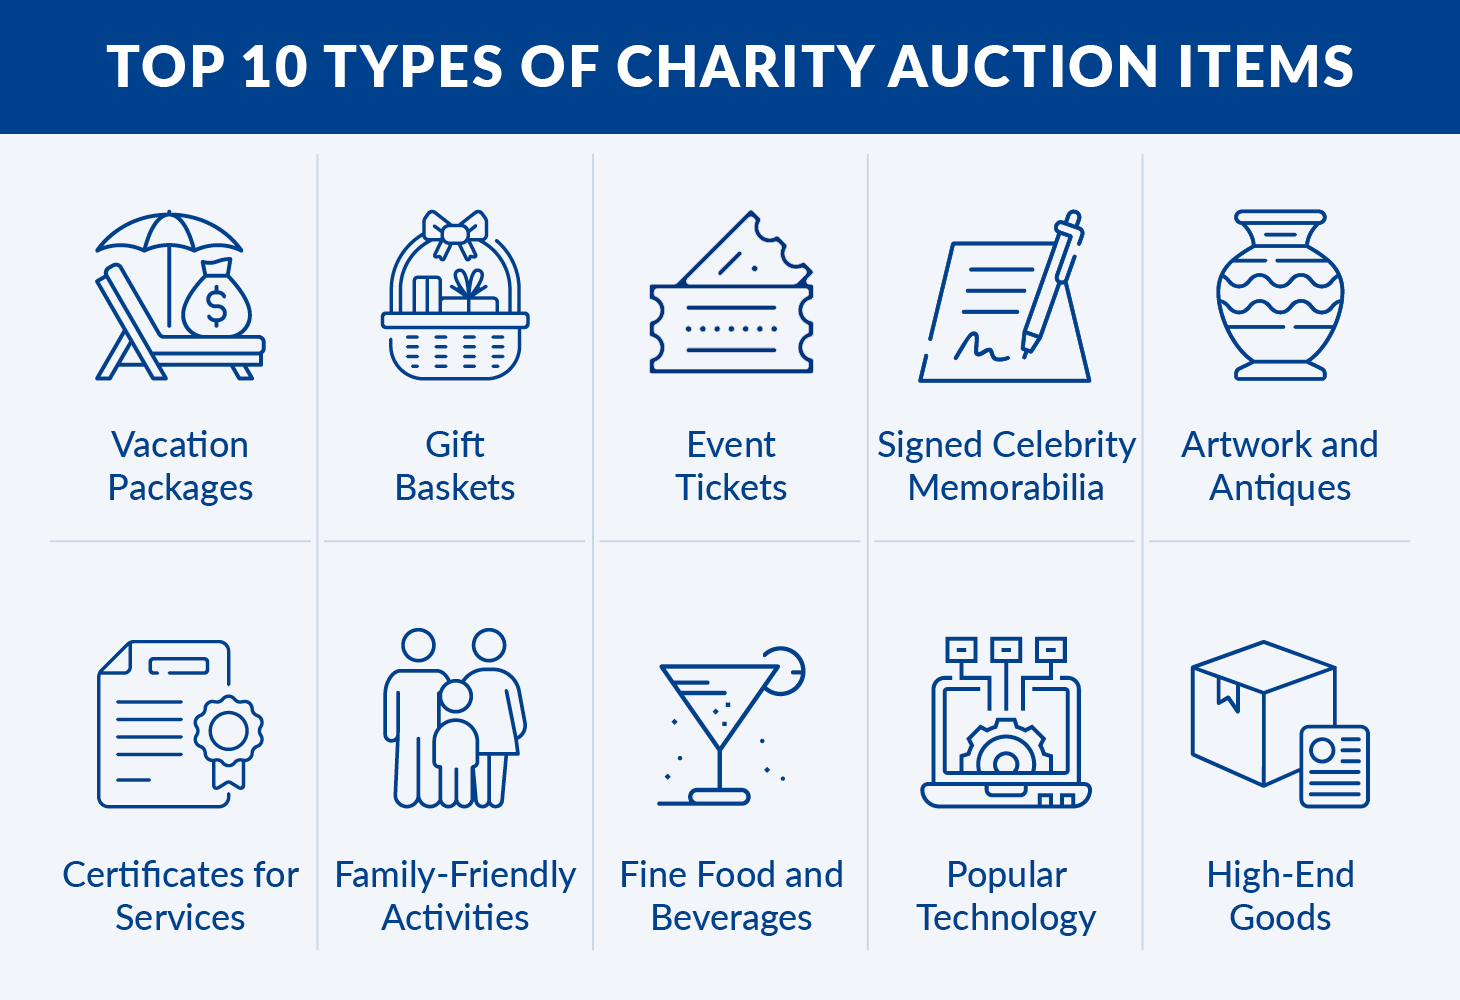 A graphic list of the top ten types of charity auction items, which are discussed in the following sections.